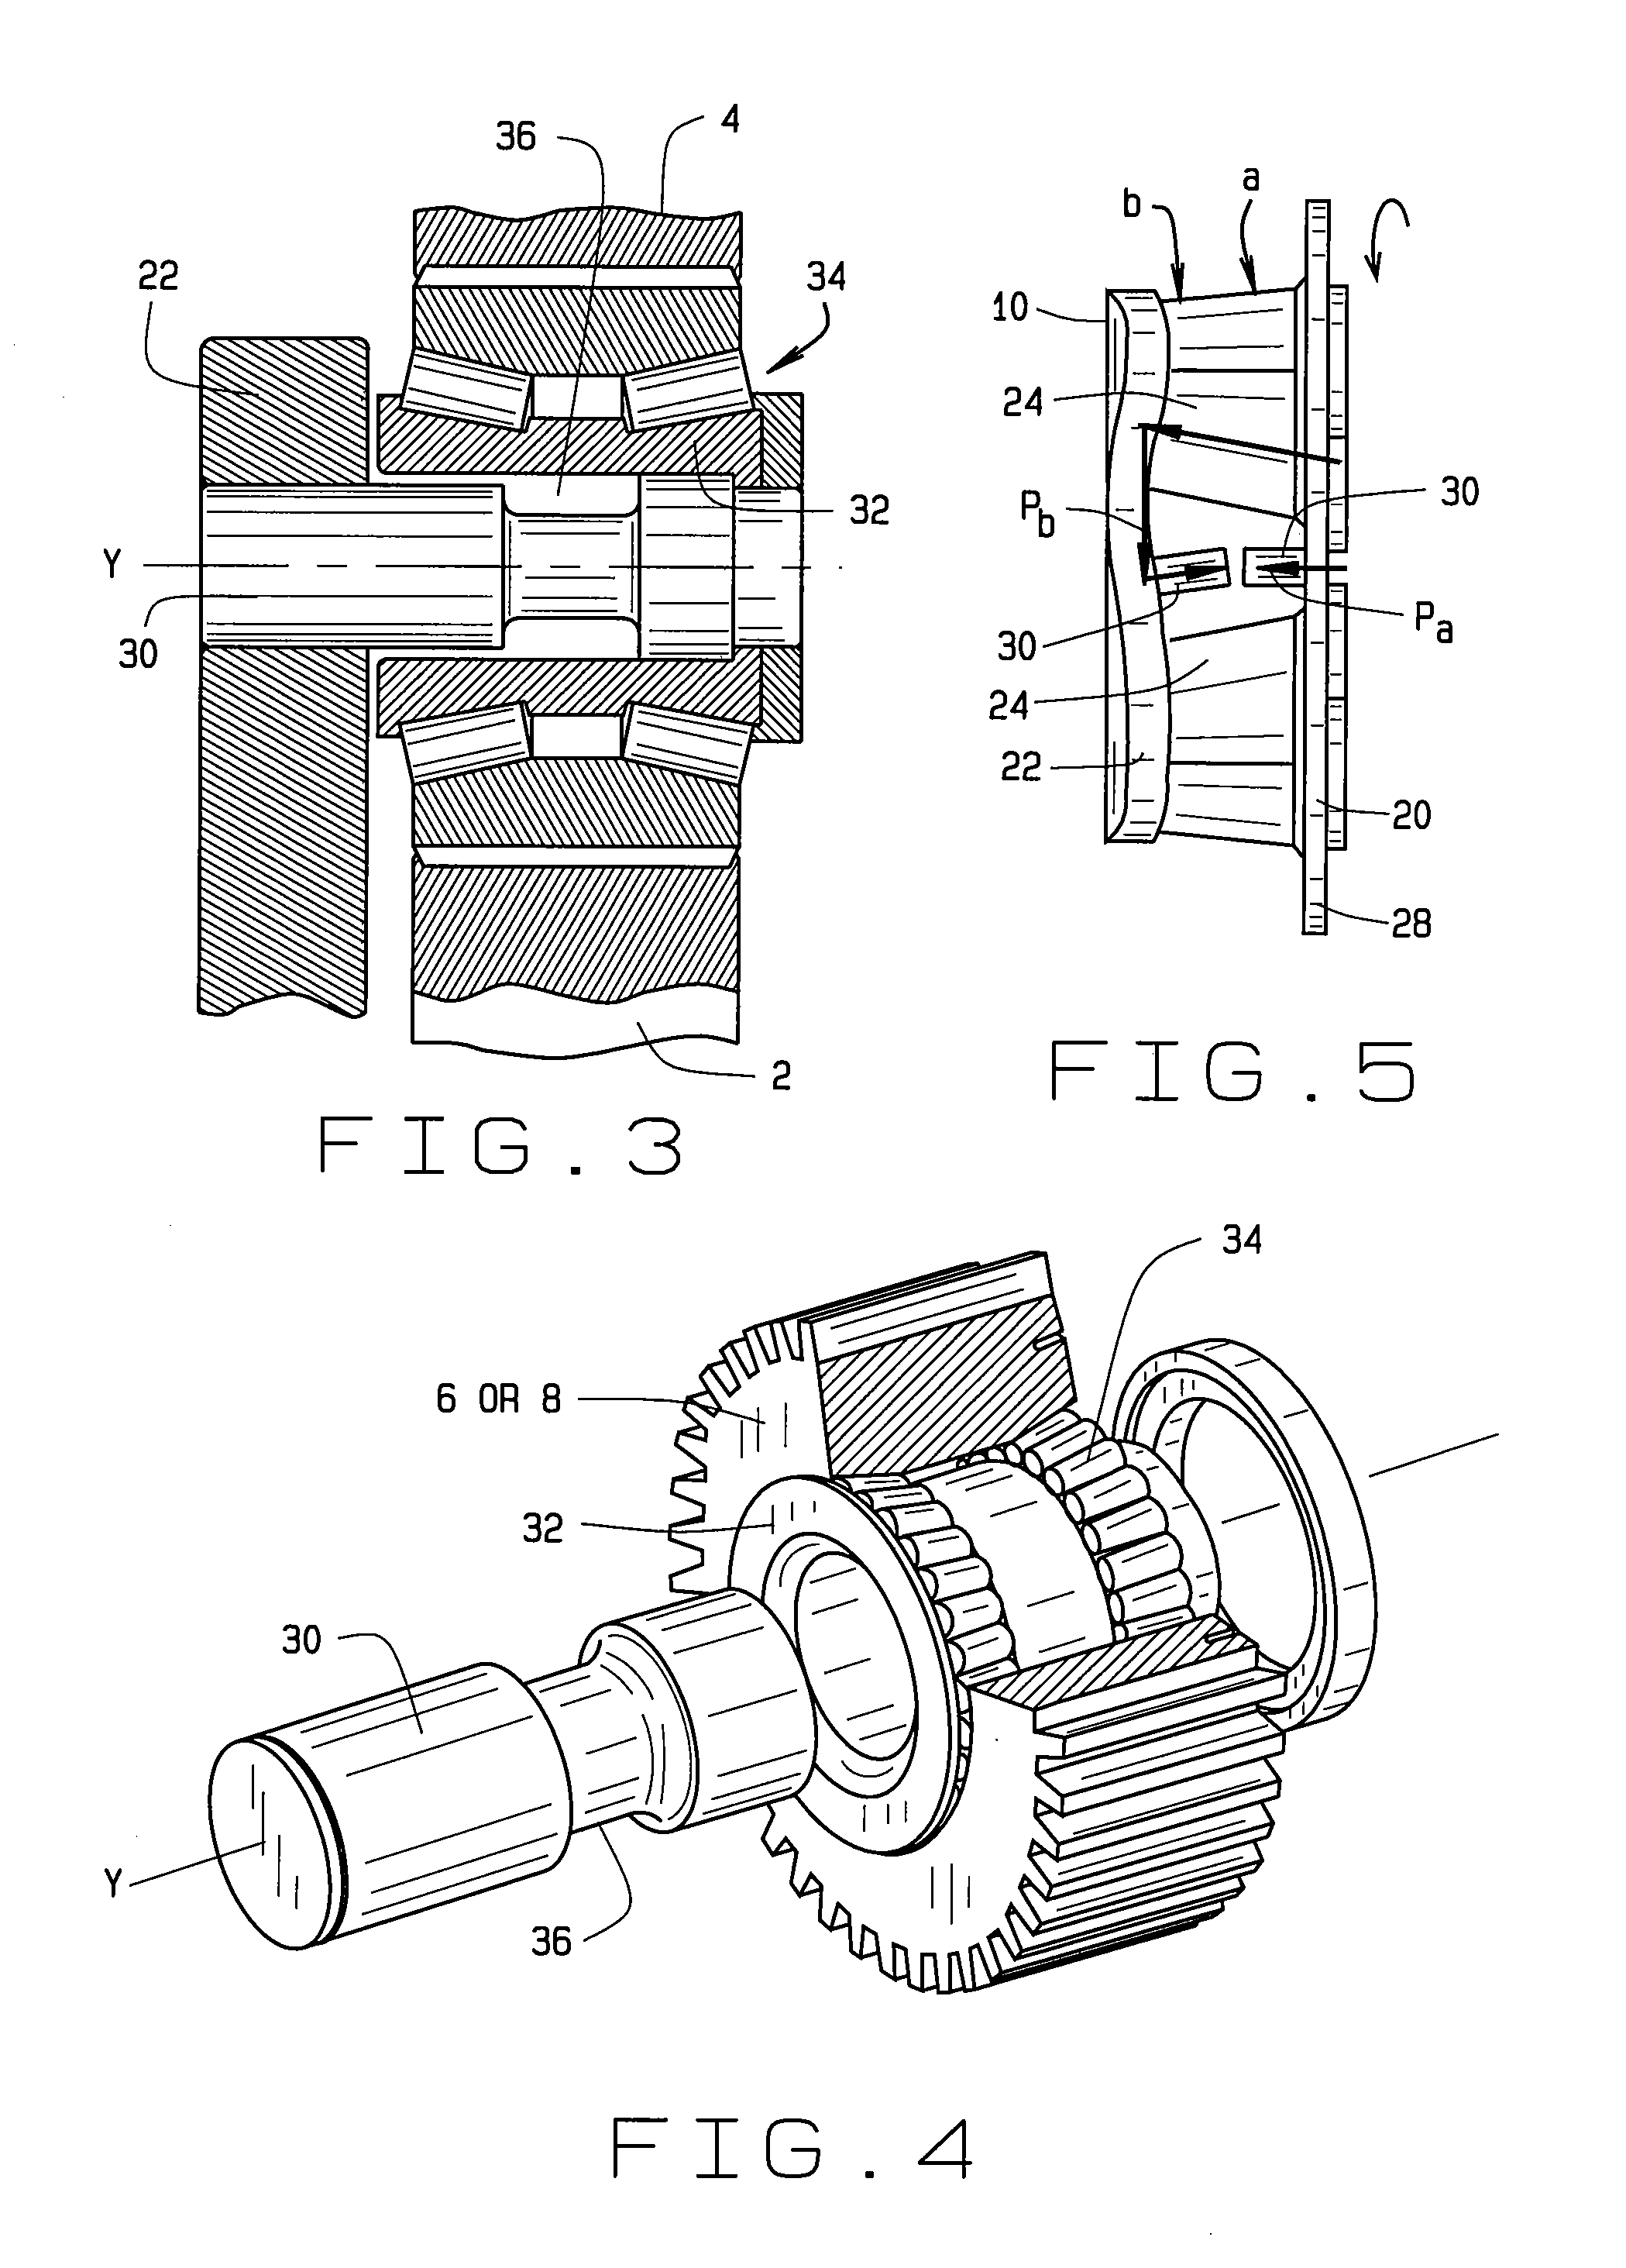 Epicyclic Gear System Having Two Arrays Of Pinions Mounted On Flexpins With Compensation For Carrier Distortion